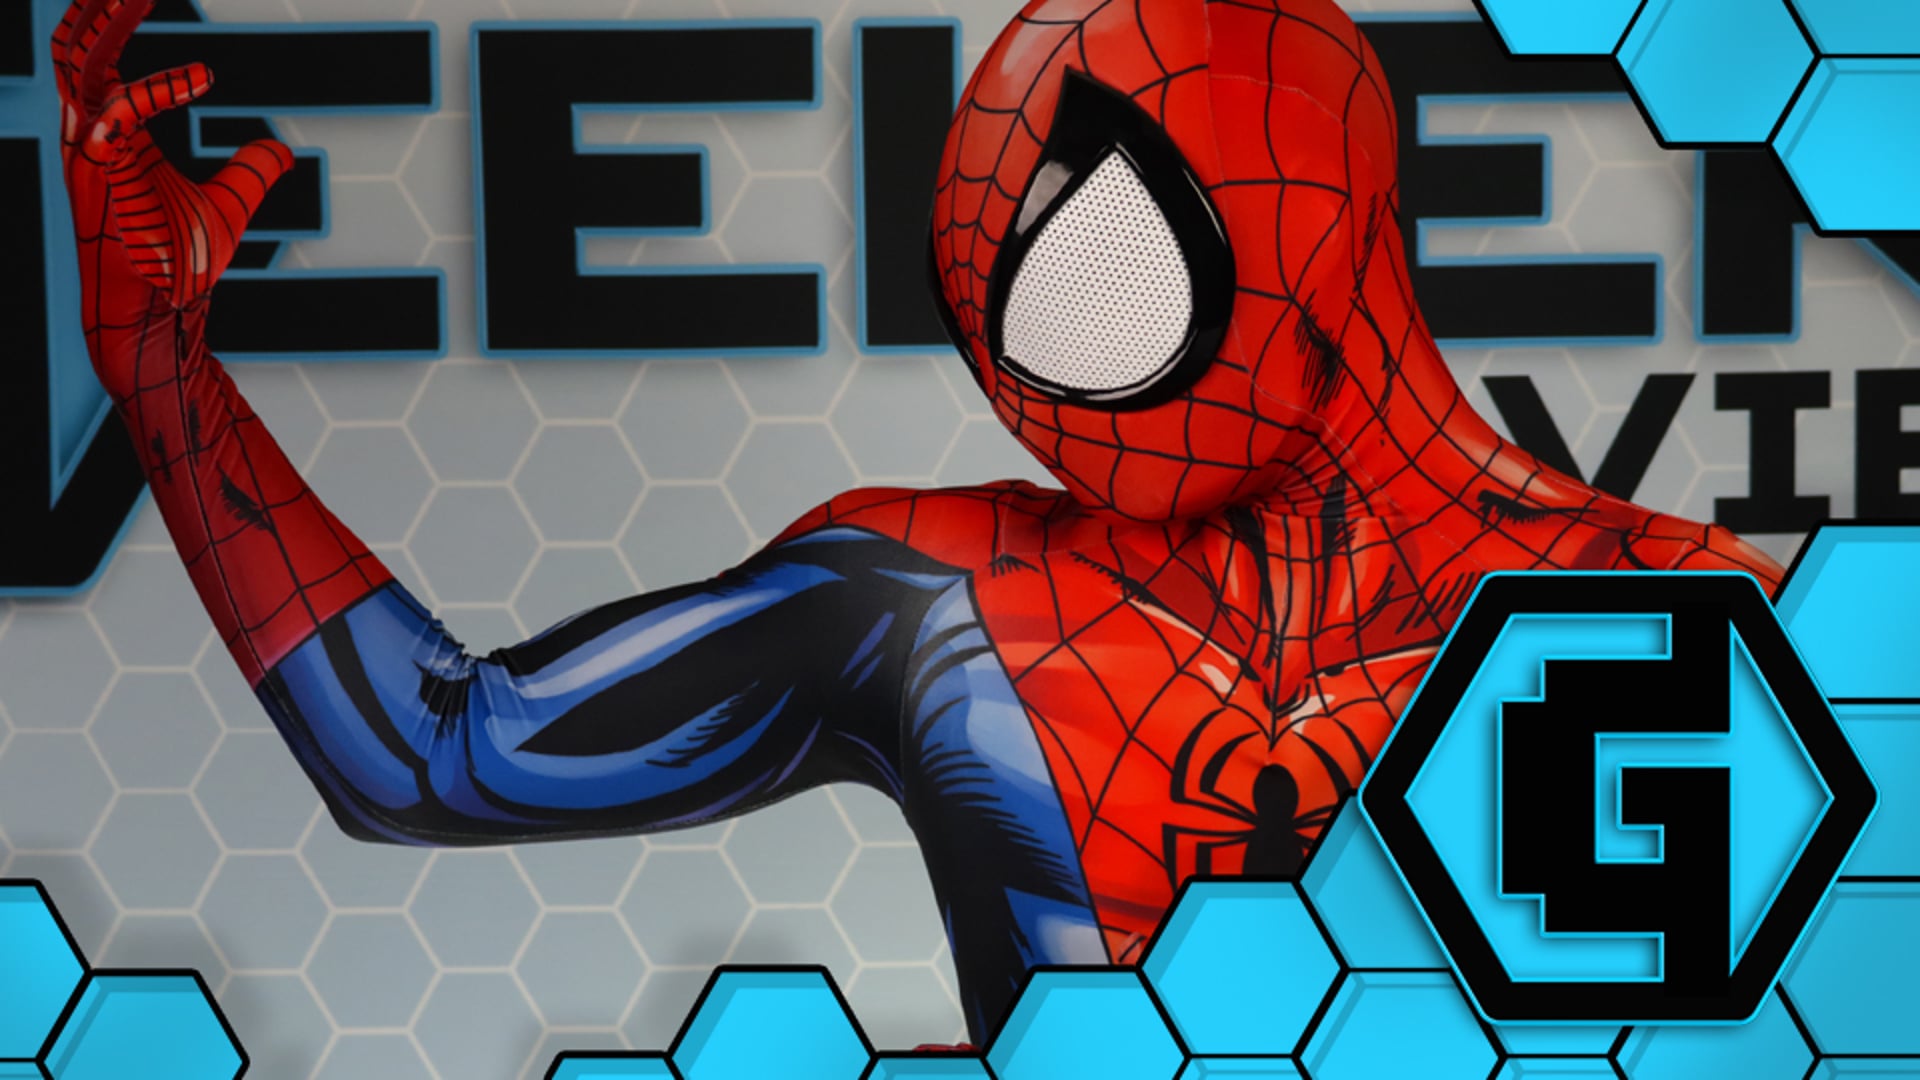 The Geekery View - Spider-Man Suit